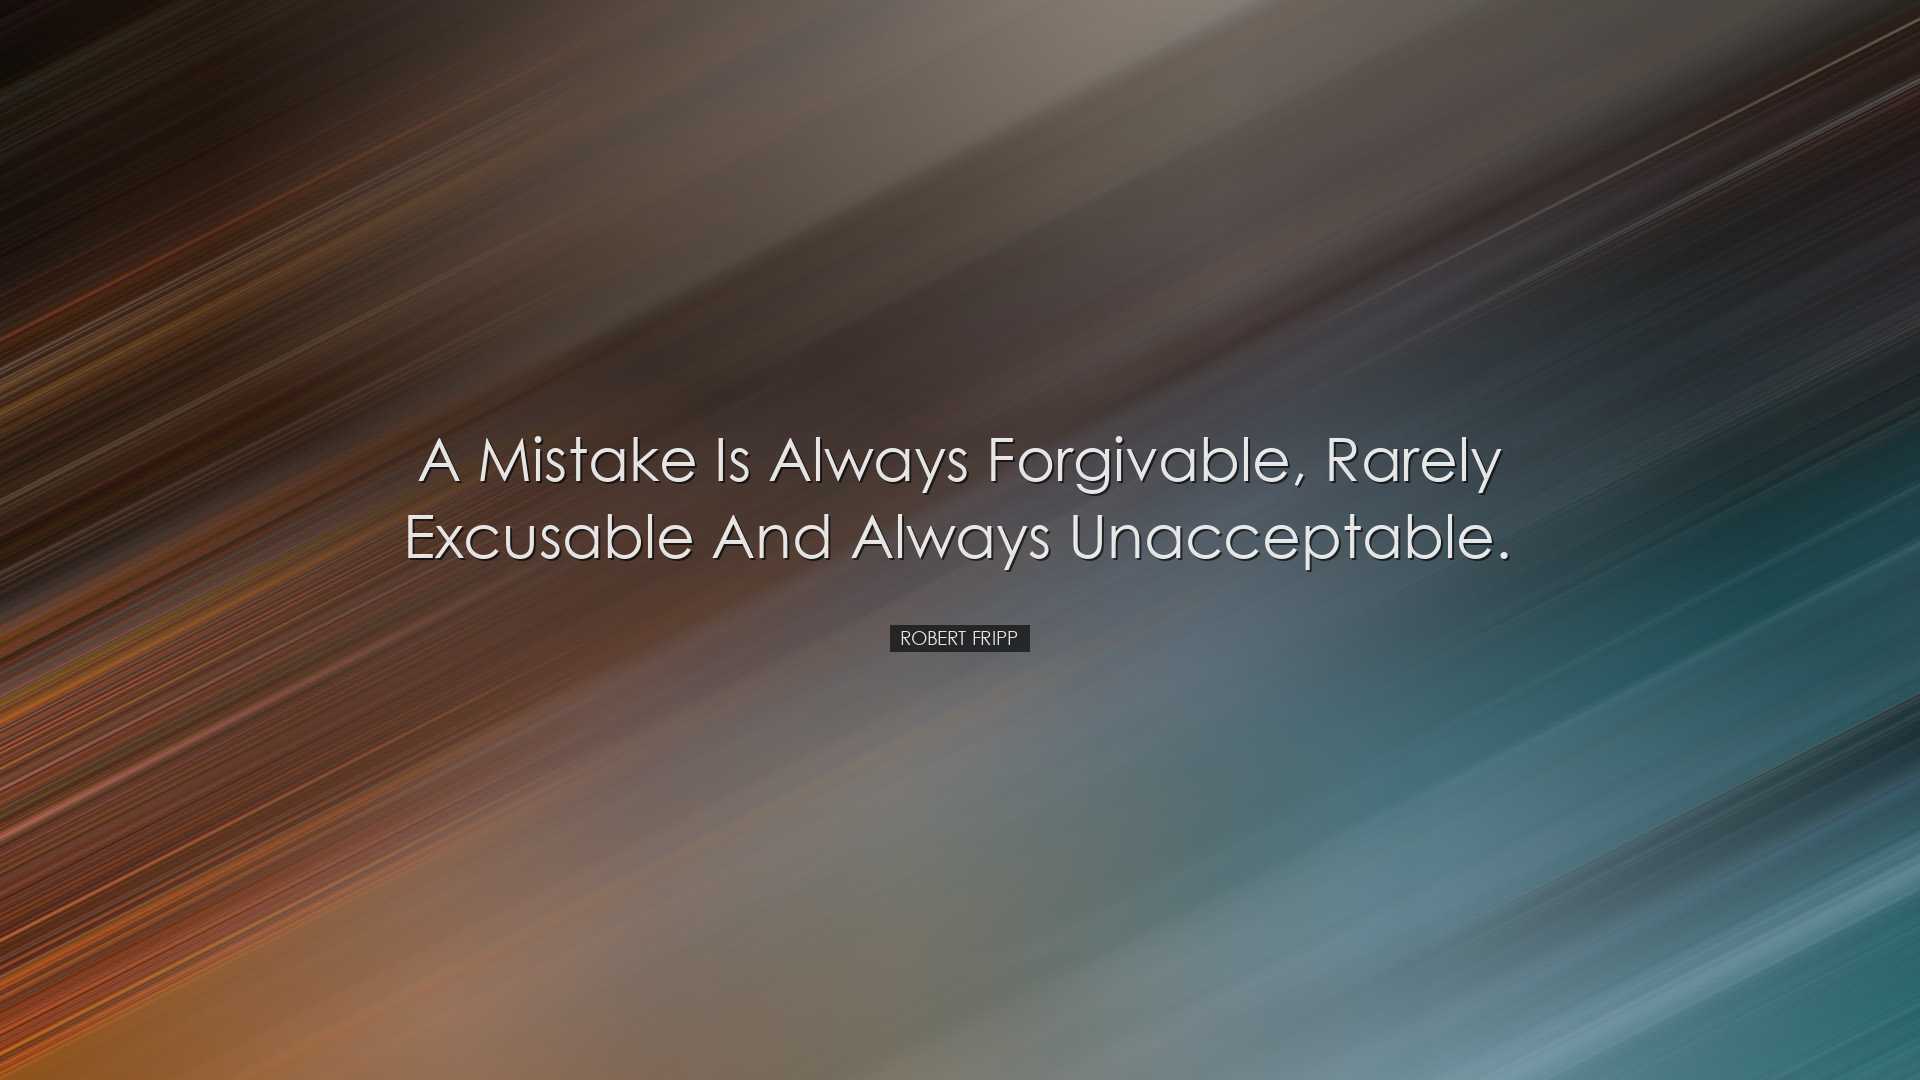 A mistake is always forgivable, rarely excusable and always unacce